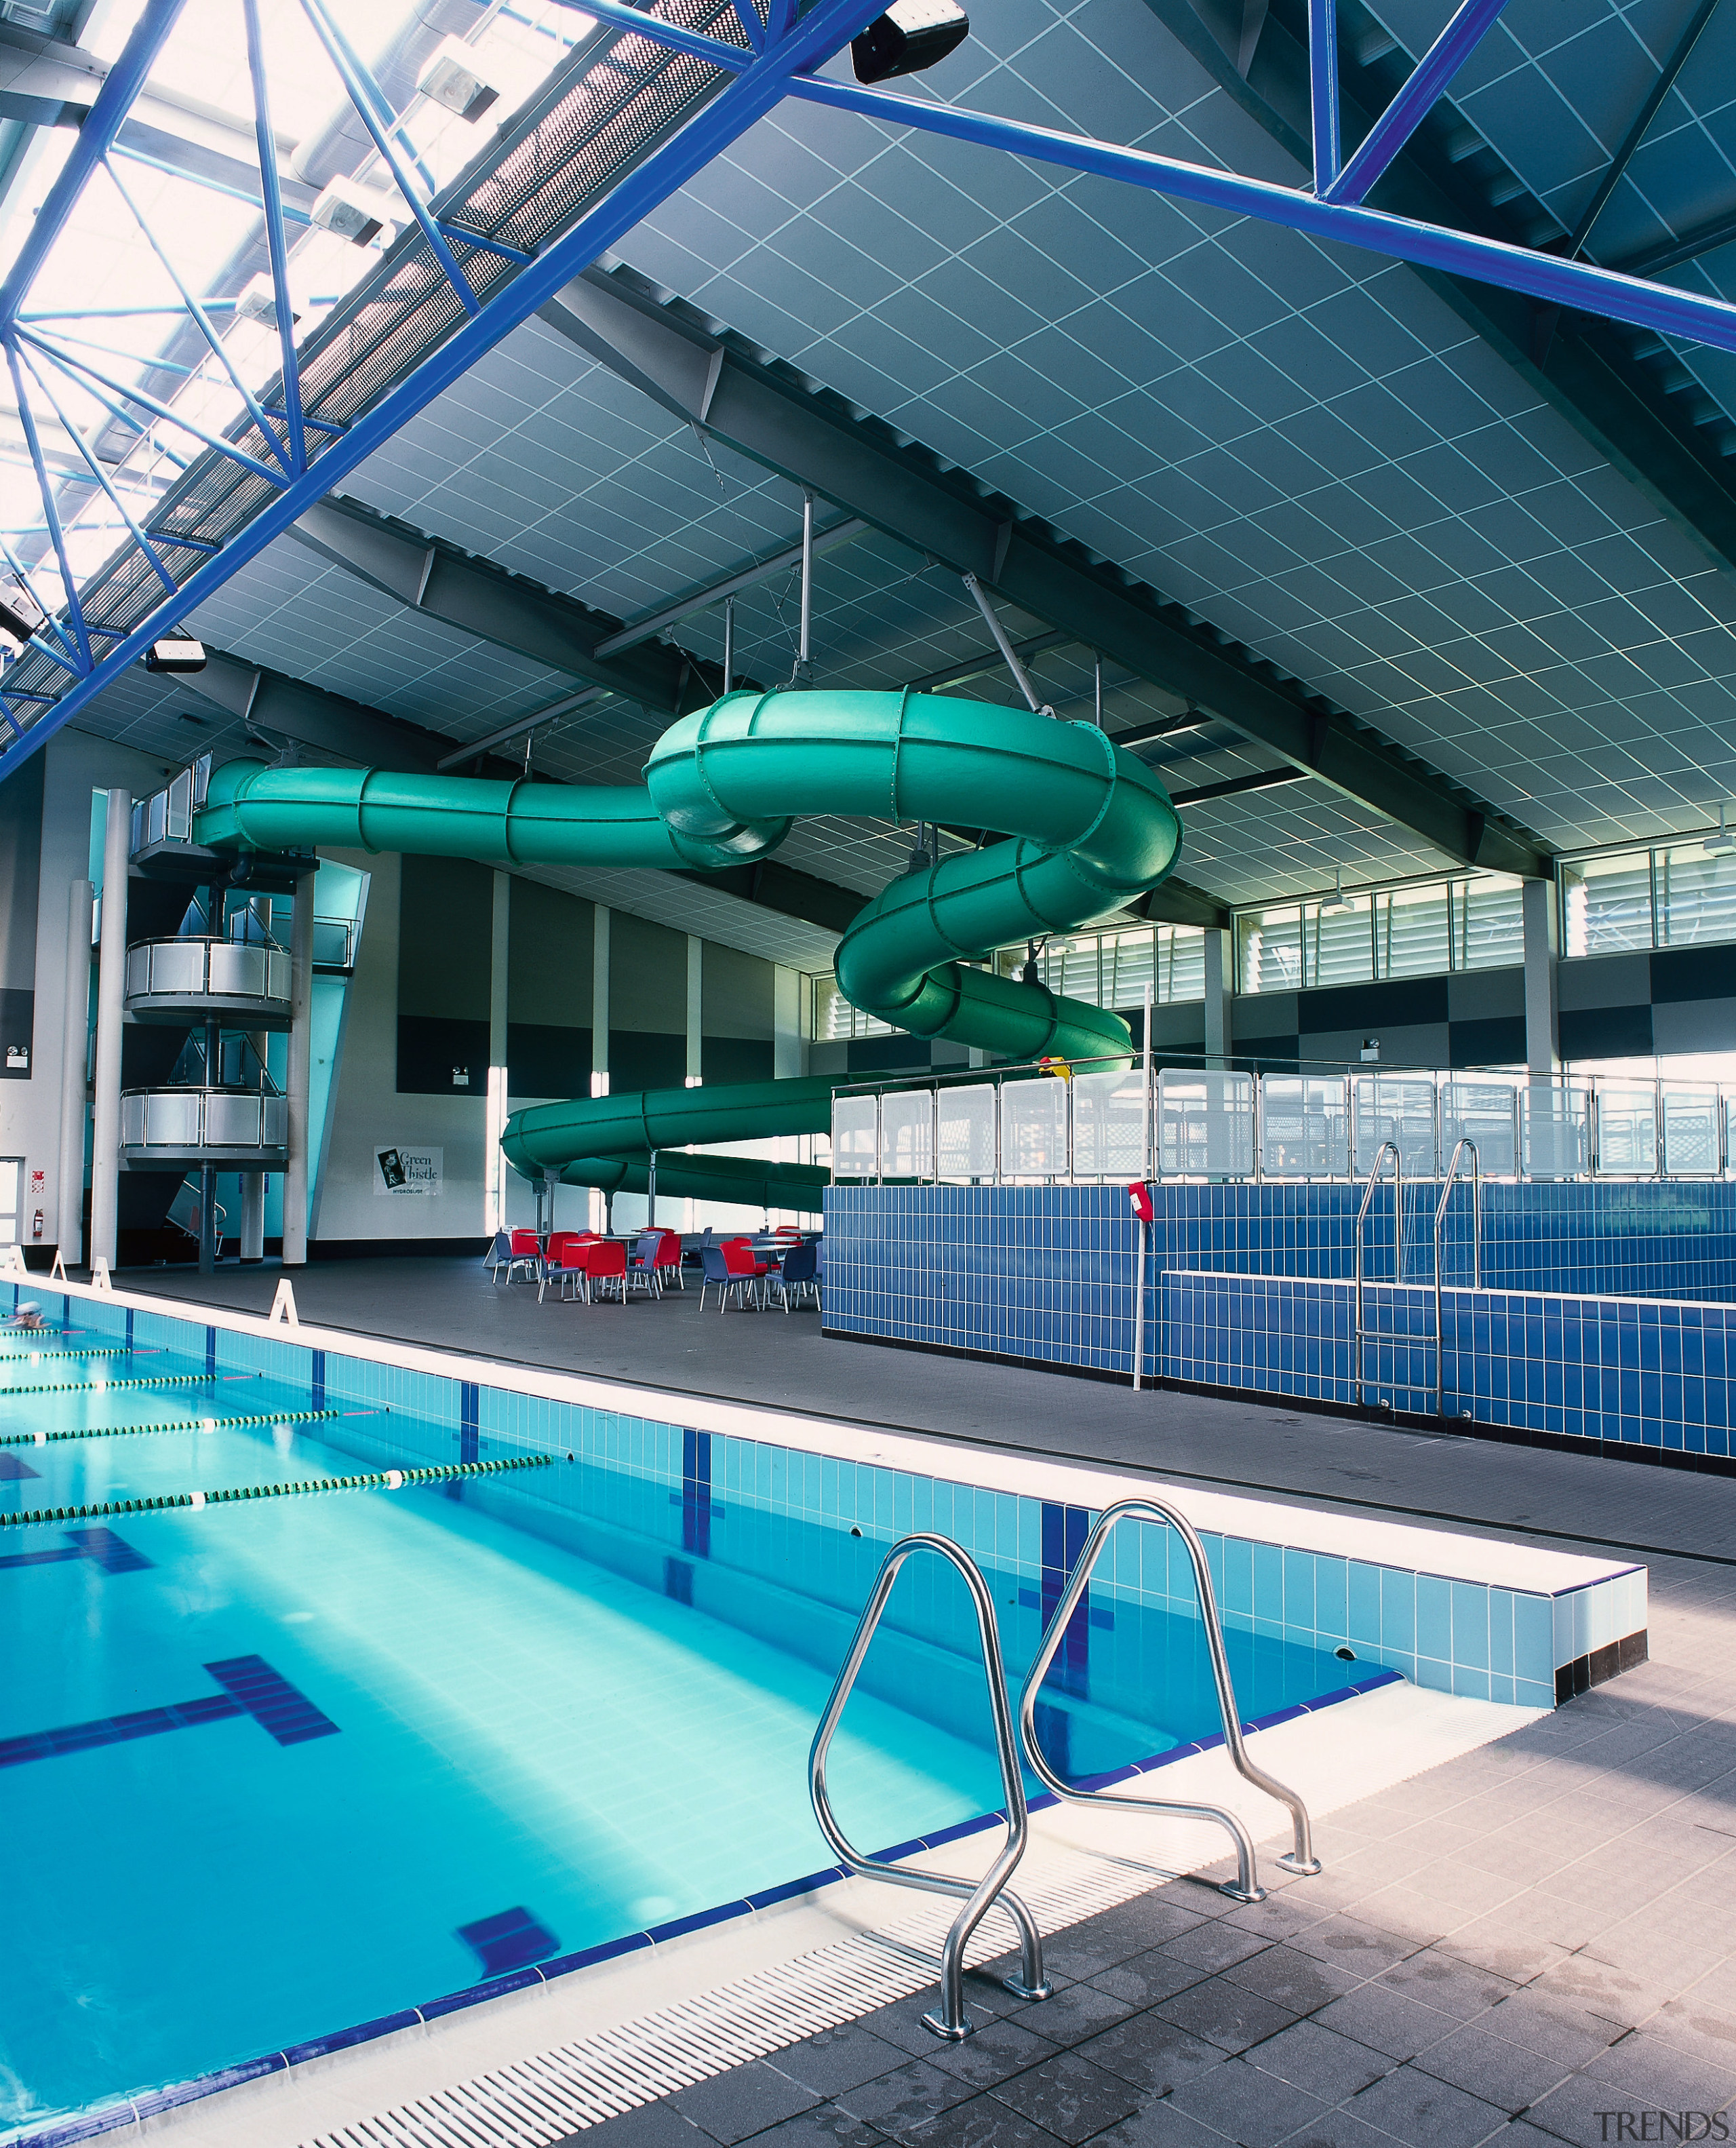 View of pool complex with ceiling panels and architecture, blue, daylighting, leisure, leisure centre, sport venue, structure, swimming pool, water, teal